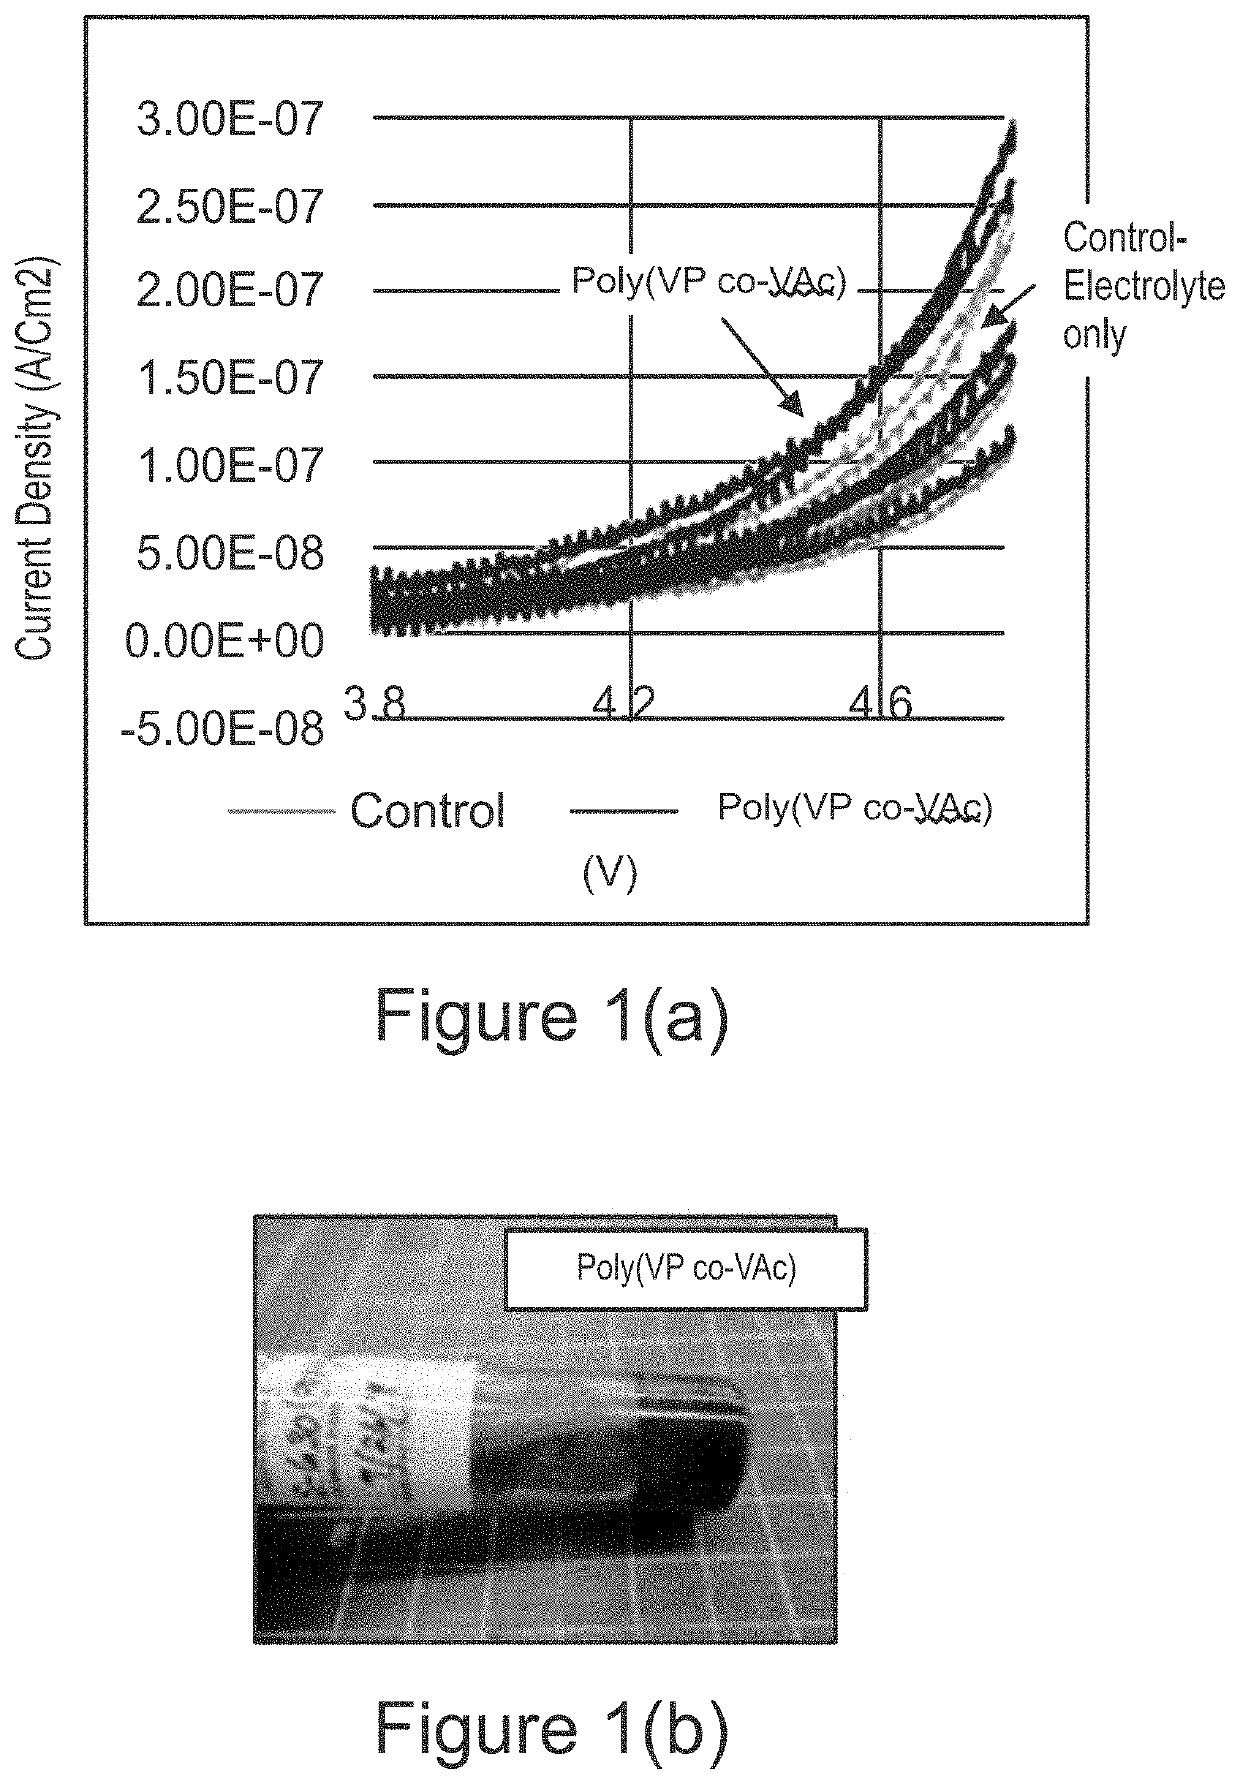 Polylactam coated separator membranes for lithium ion secondary batteries and related coating formulations